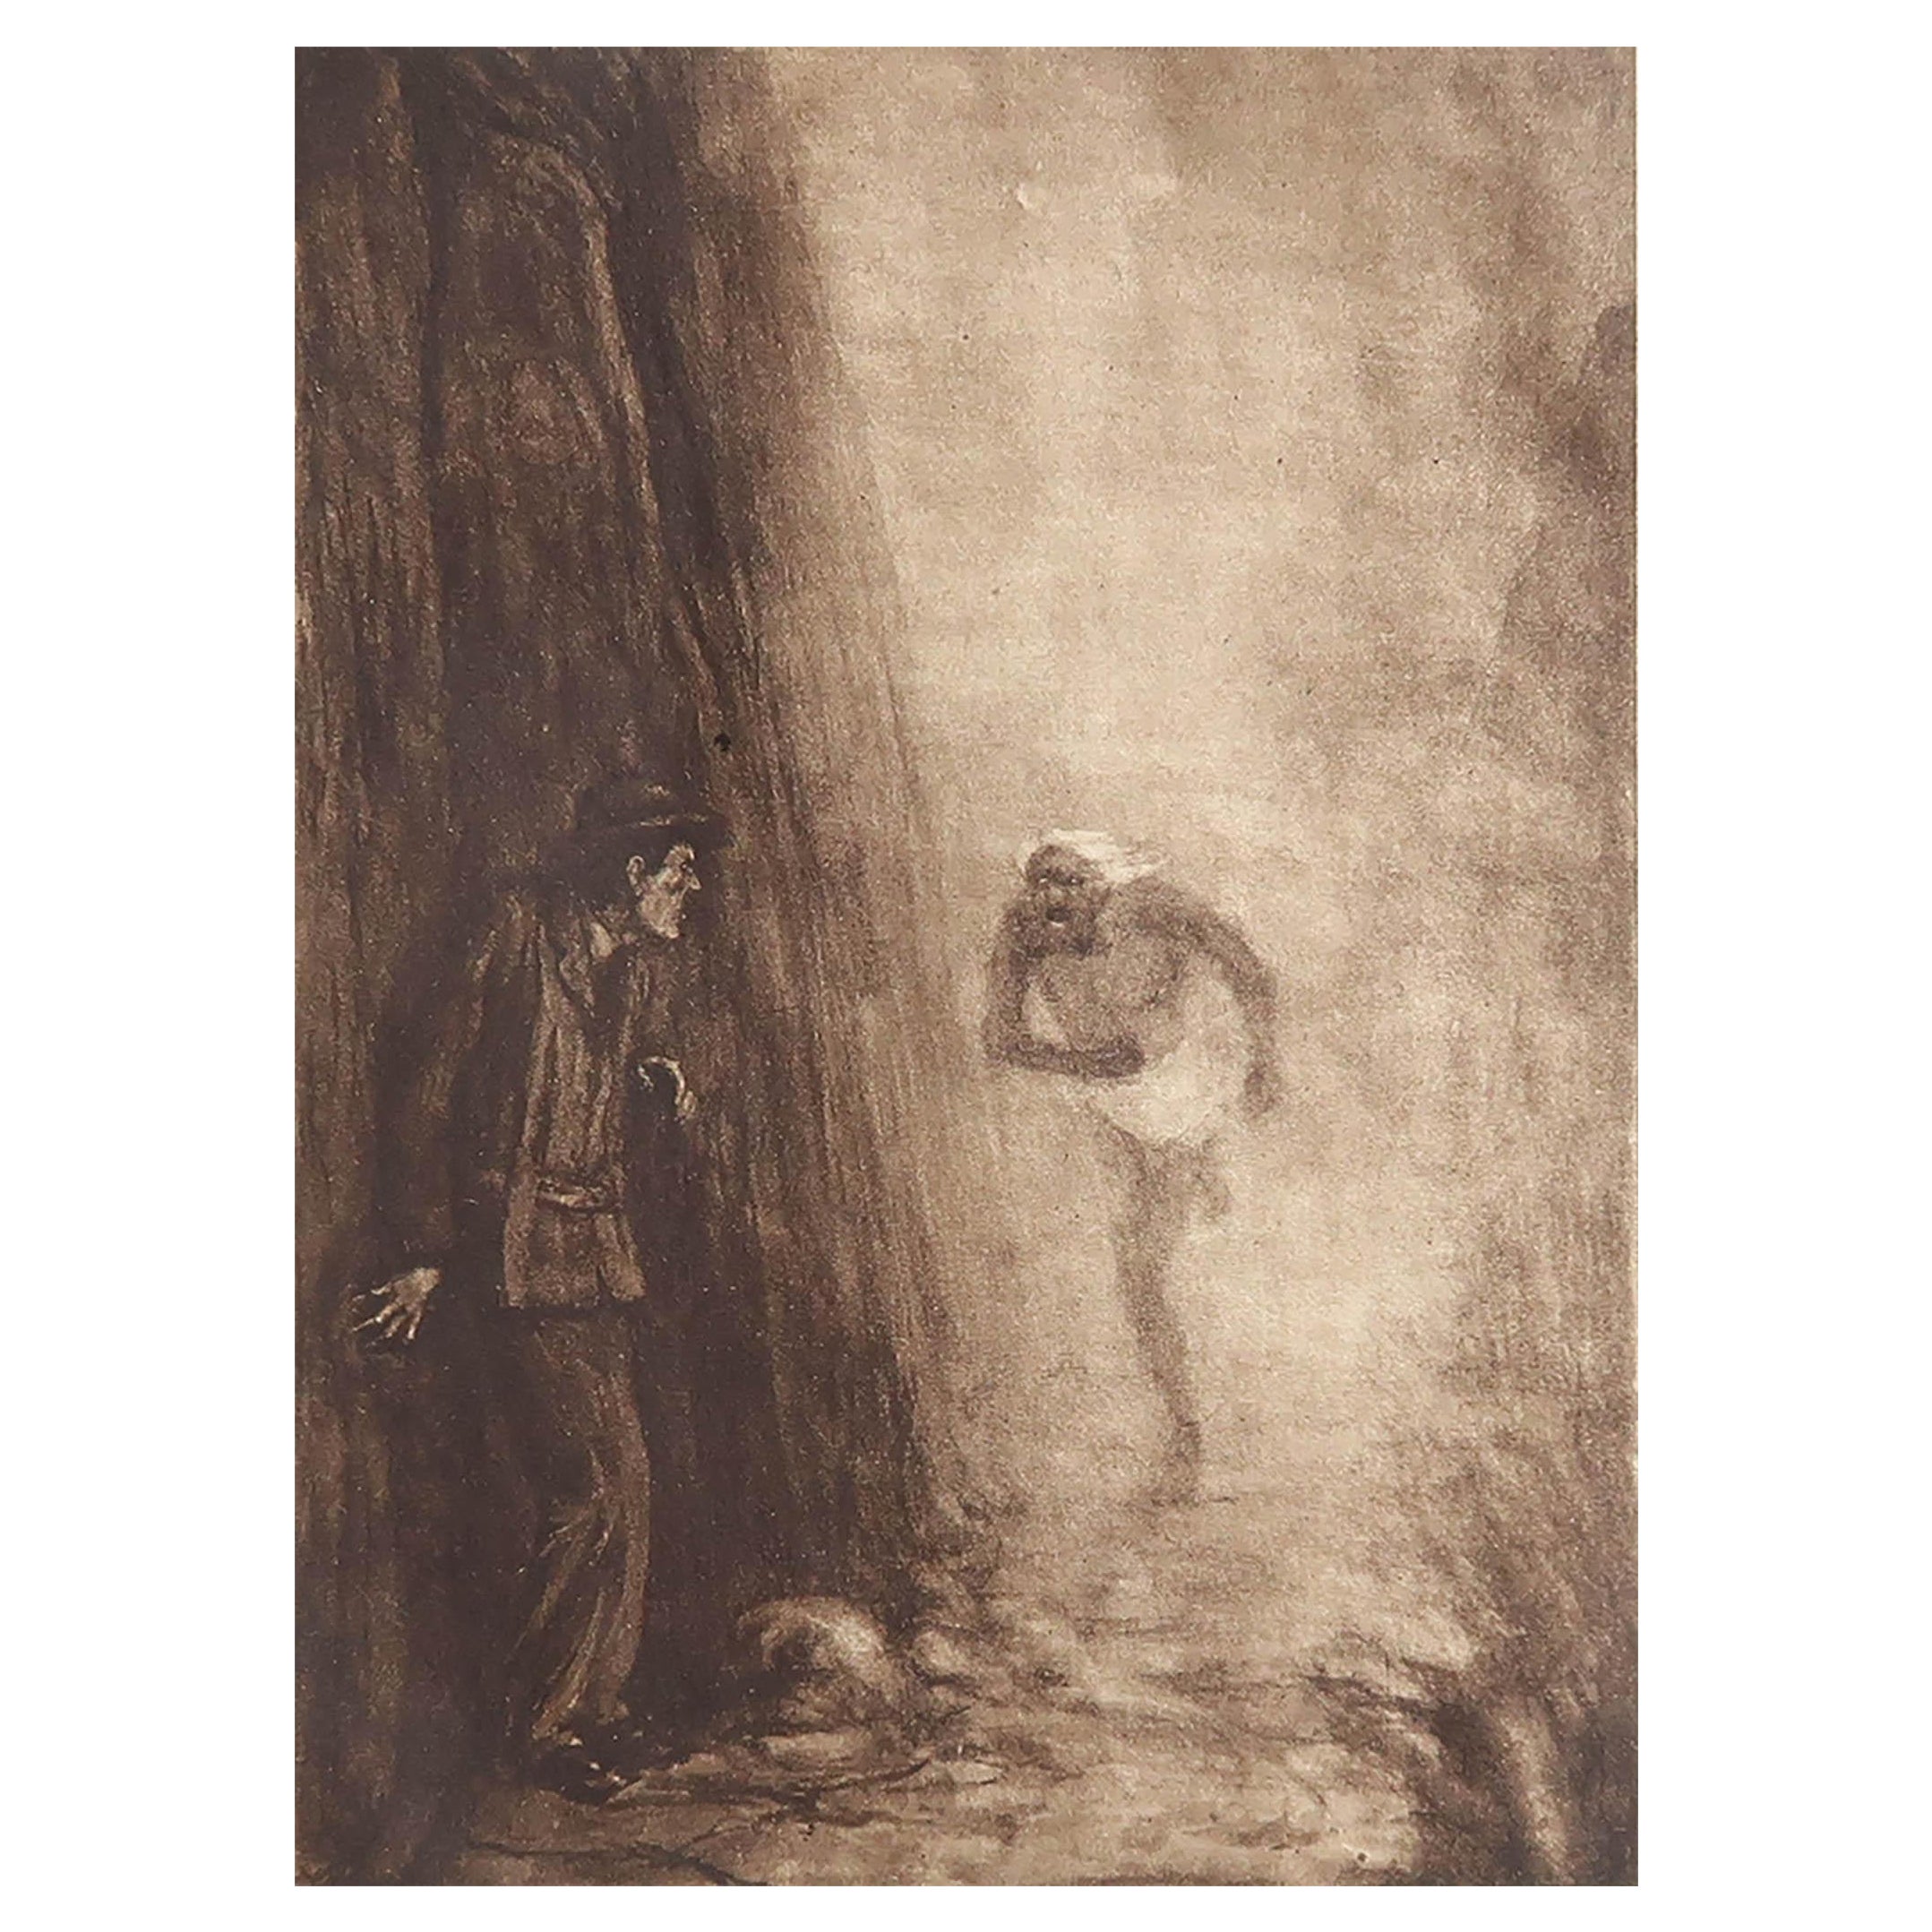 Original Limited Edition Print. Frederick S.Coburn, Tale of The Ragged Mountains